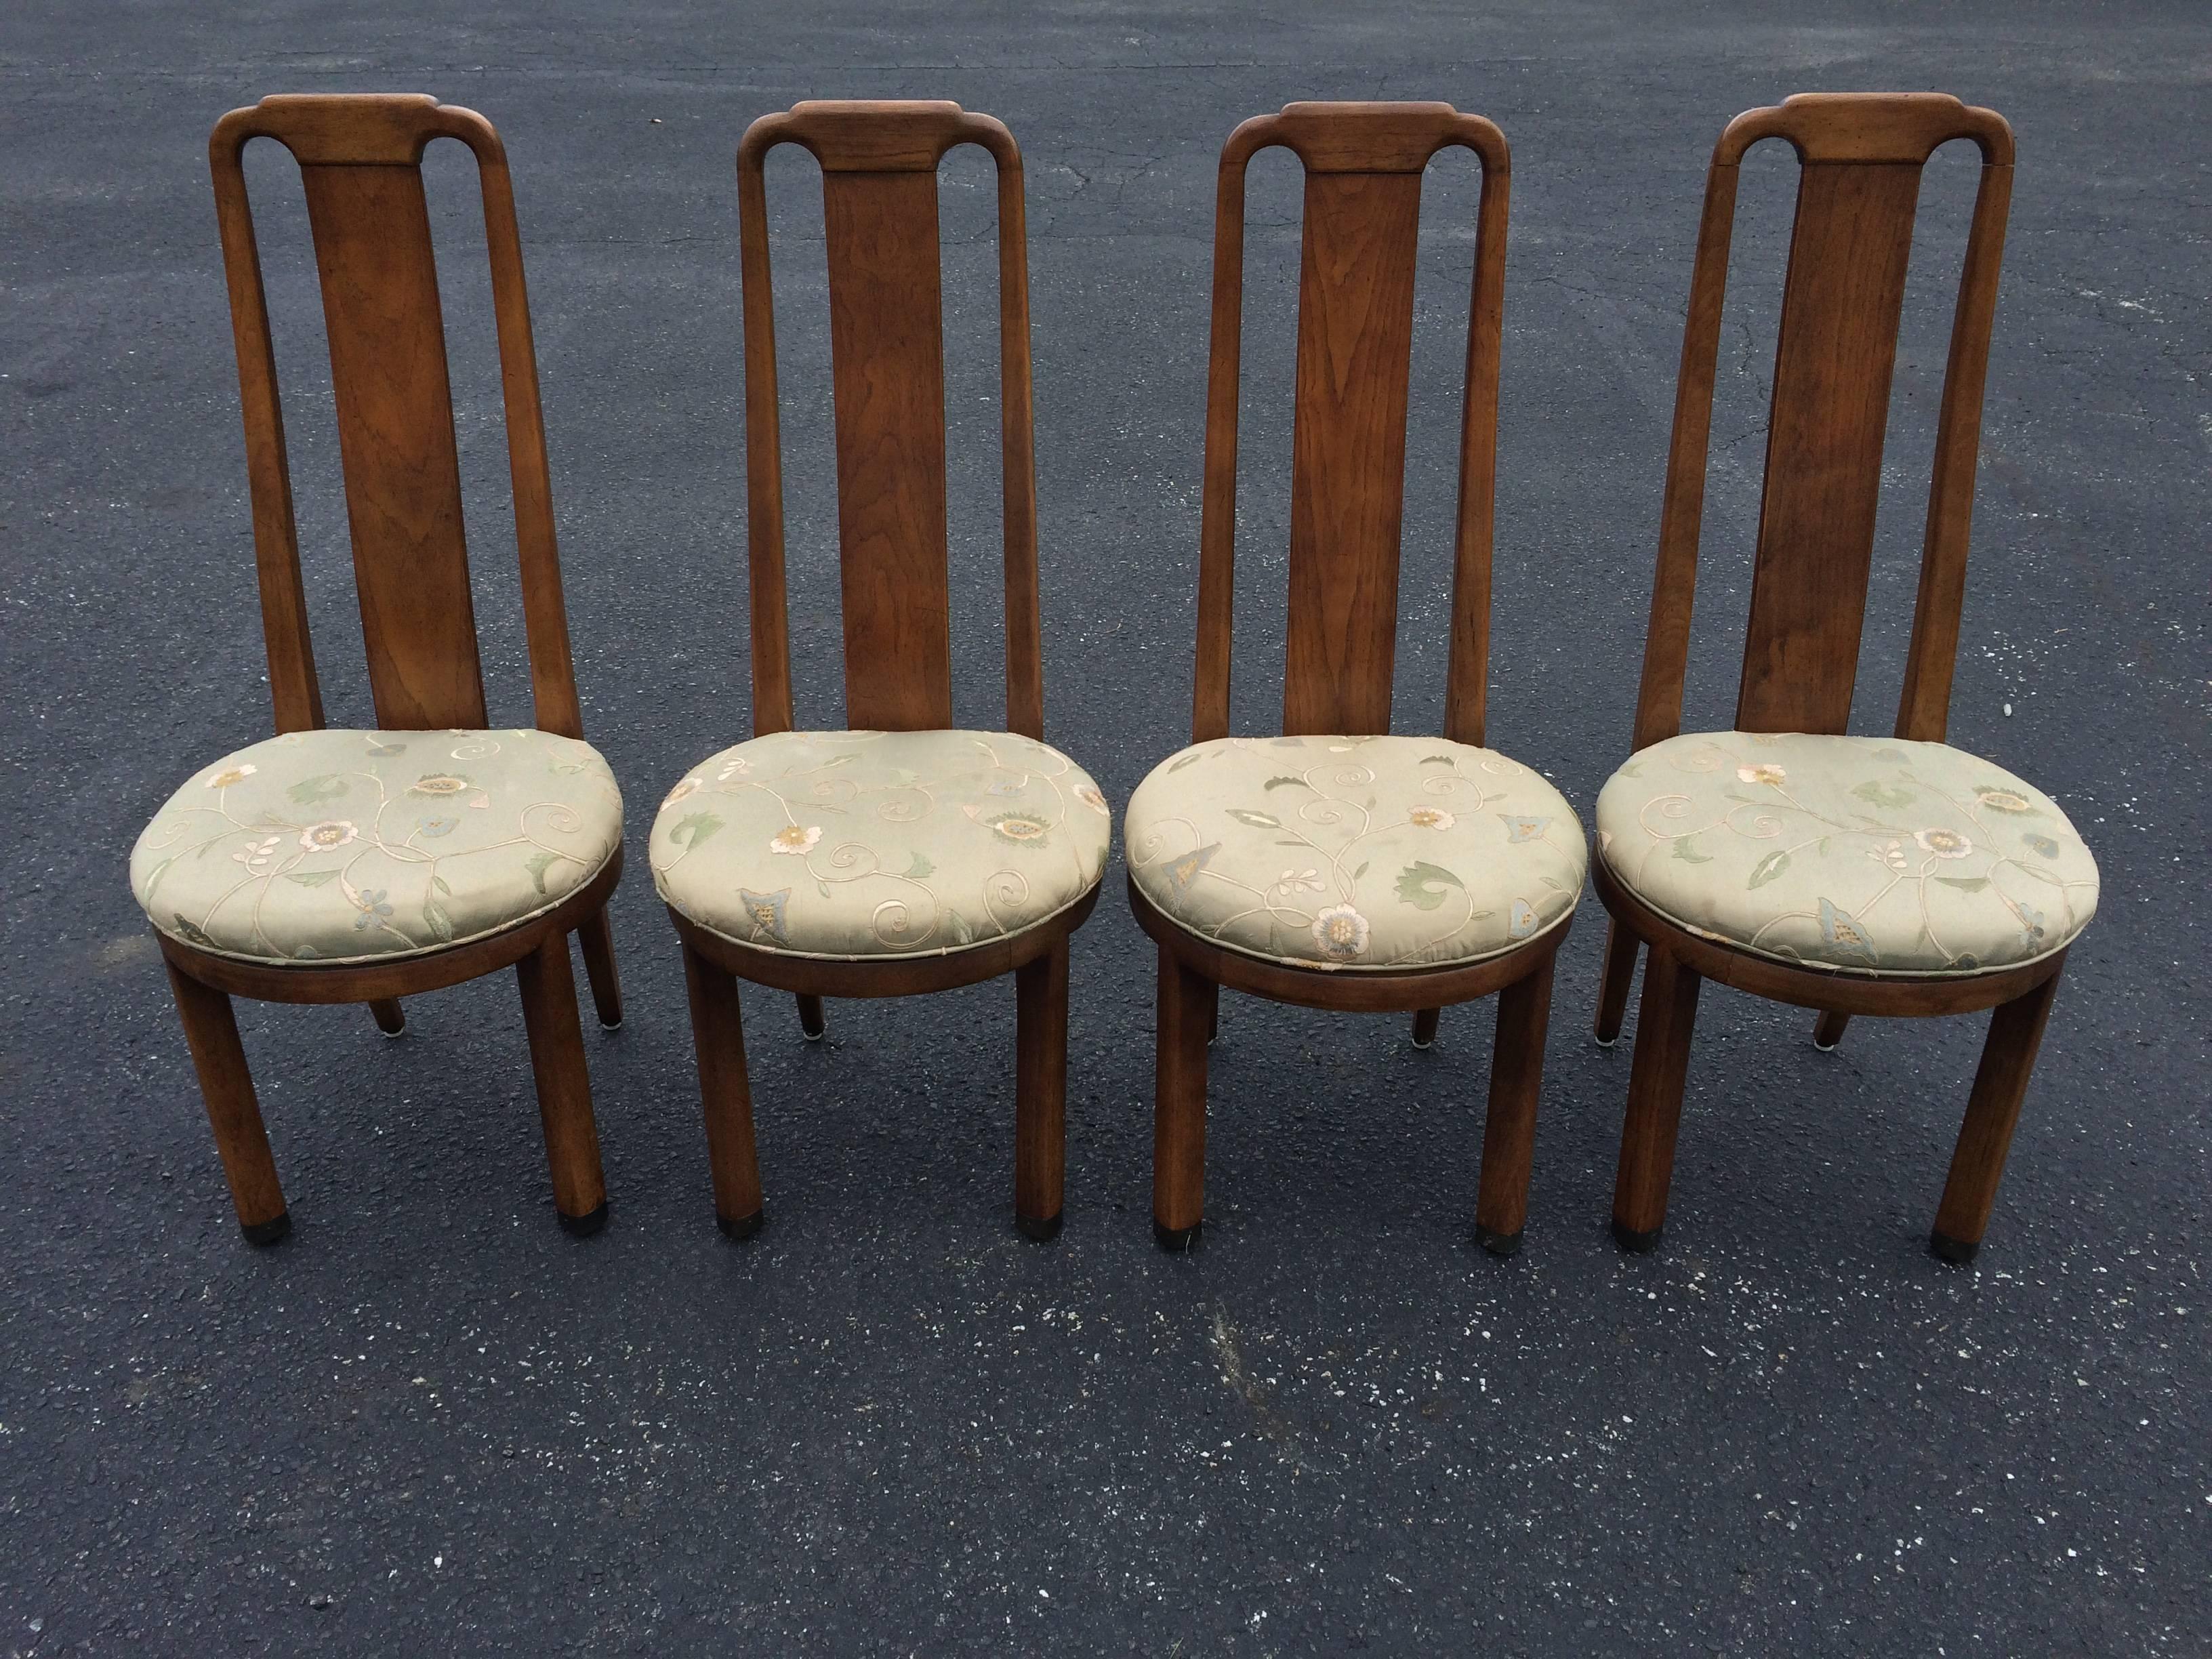 Set of Four High Back Henredon Dining Chairs. Great Mid Century- Hollywood Regency  Styling and shape. Round seat is covered in a floral silk but can easily be replaced. Brass fitted caps on feet of chairs. Very elegant for any table. Please confirm